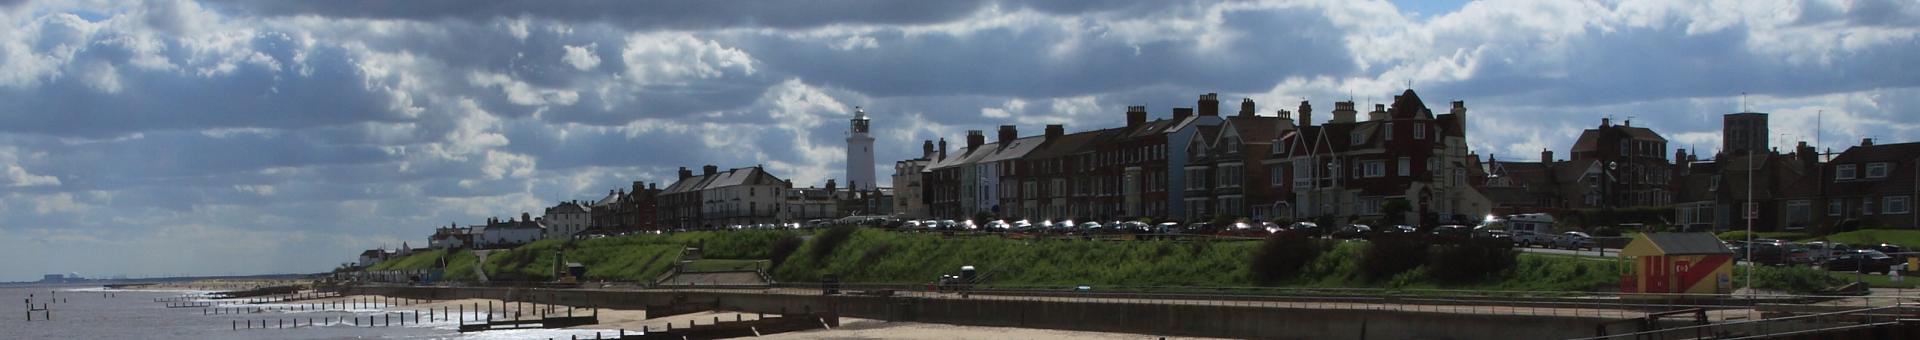 We welcome members from a wide area of North East Suffolk - including Lowestoft